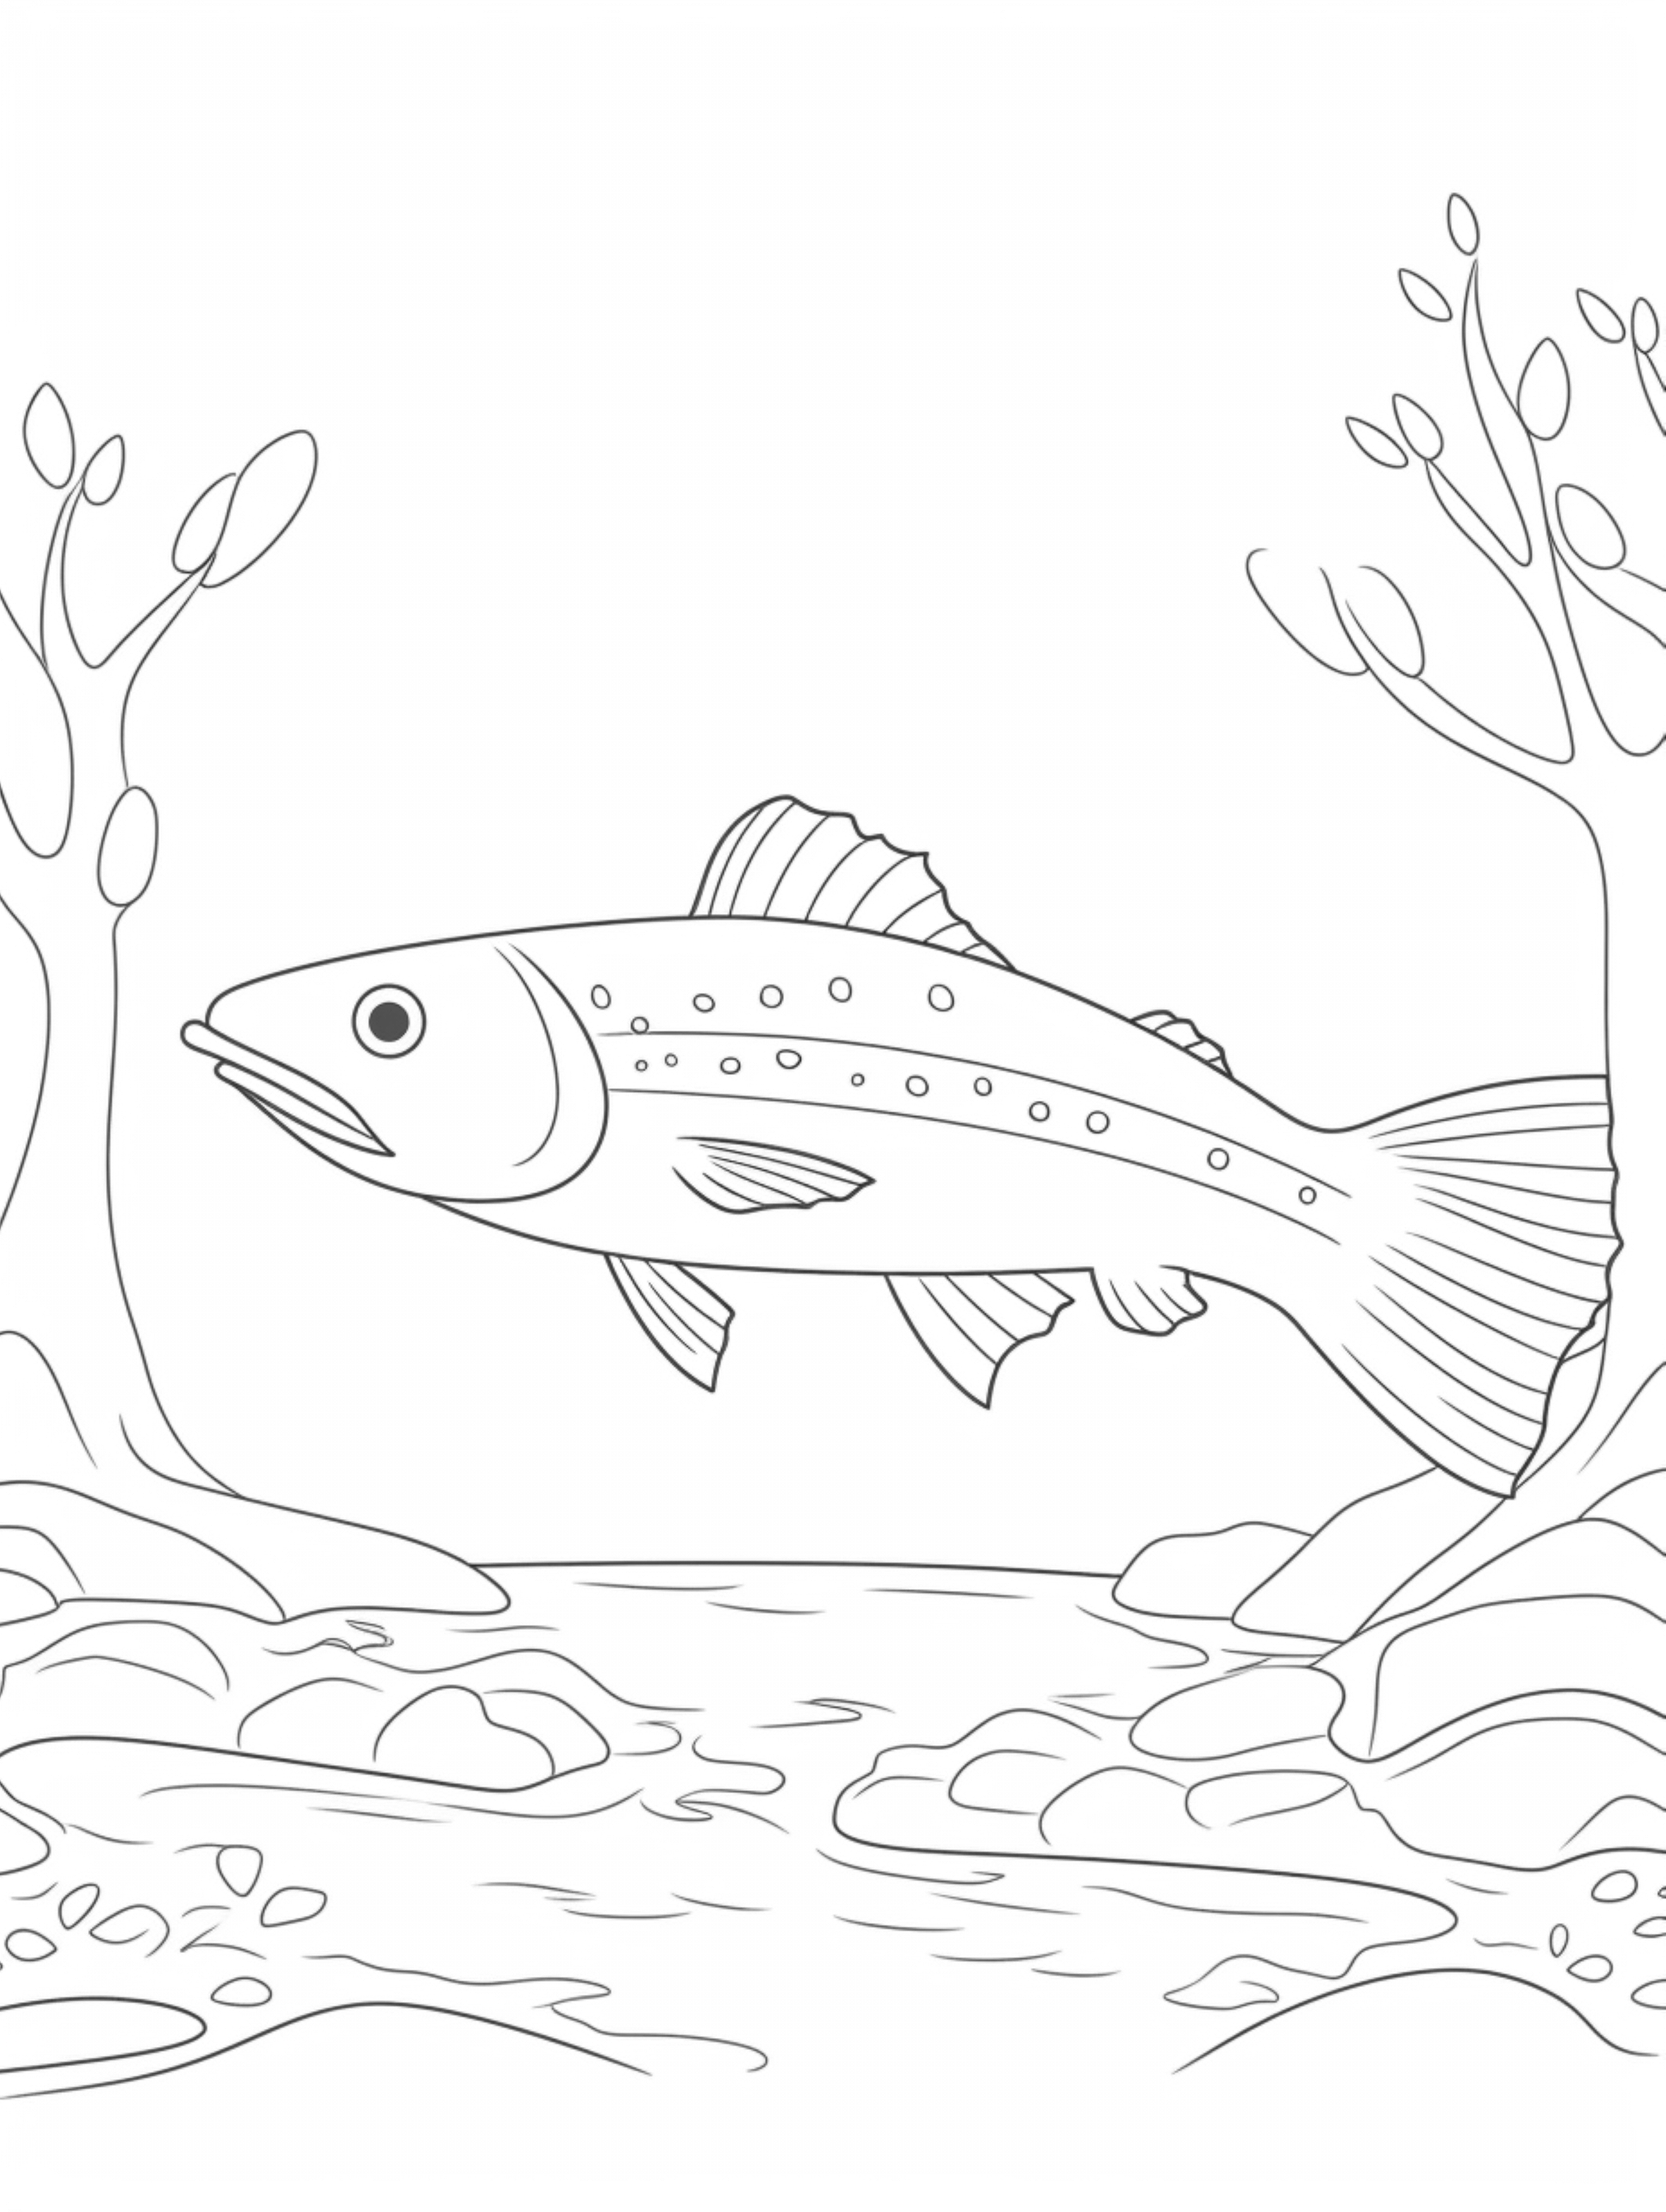 trout coloring pages